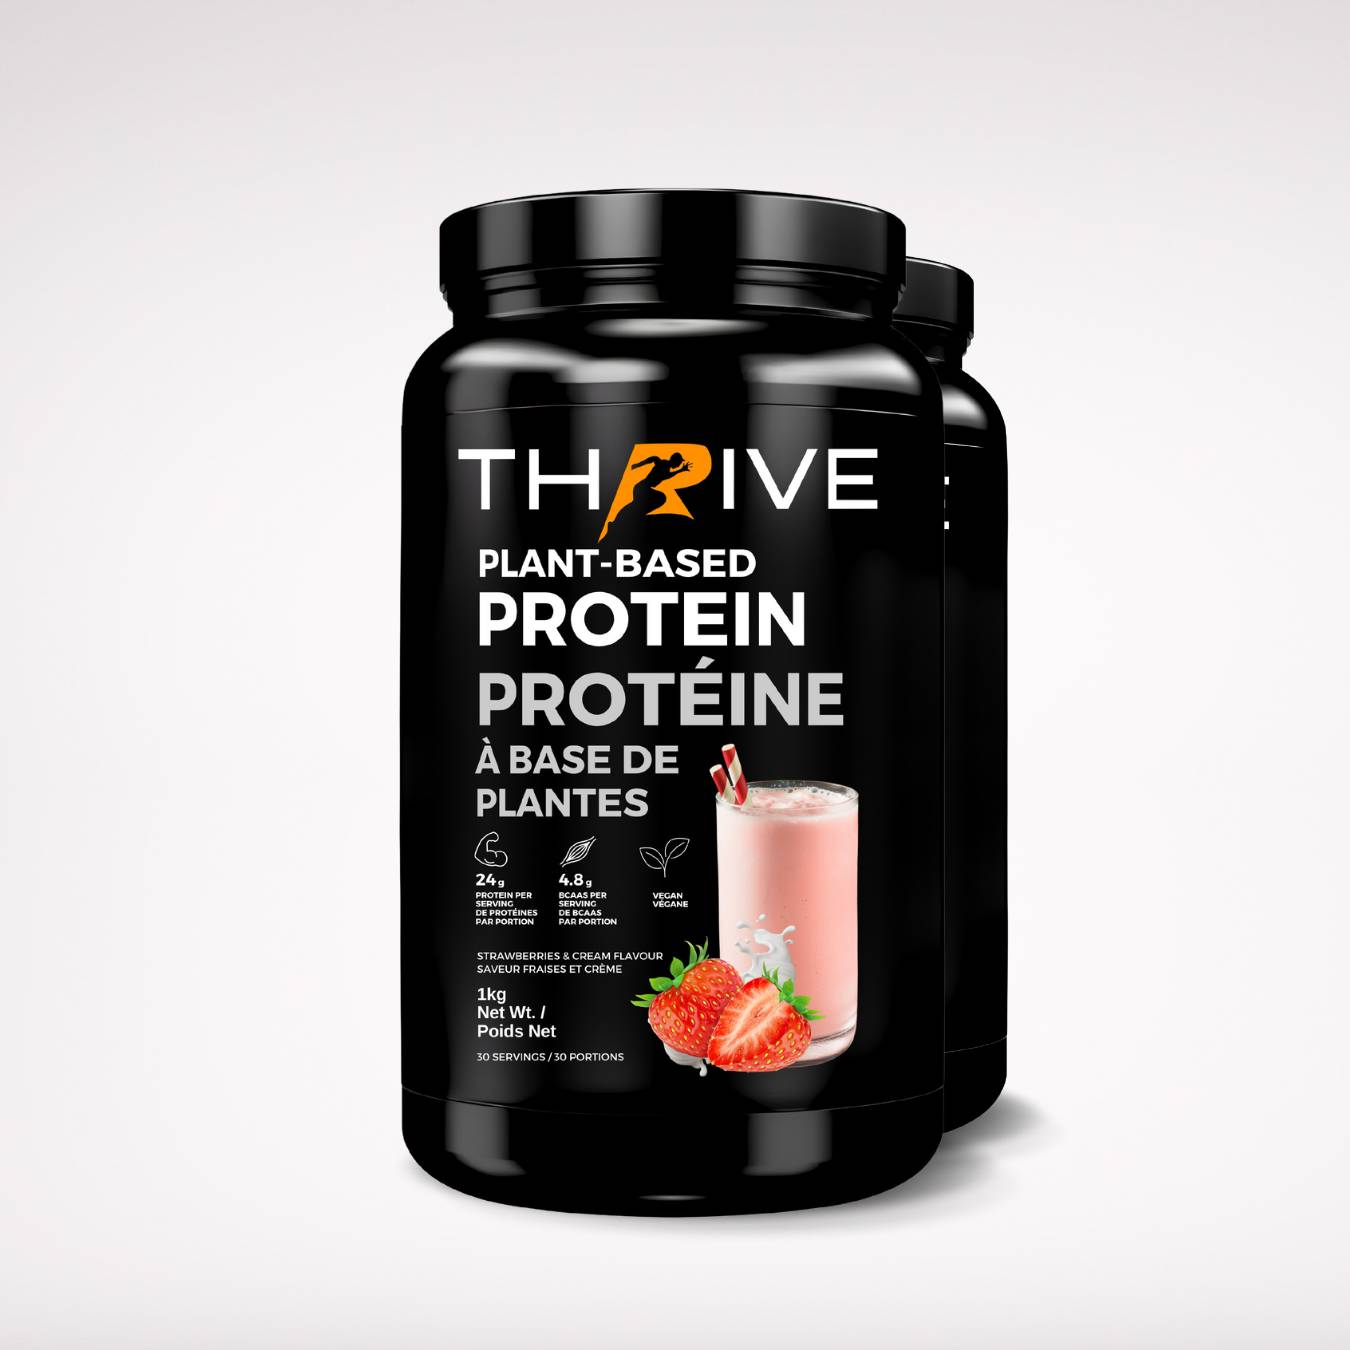 Thrive Plant-Based Protein Strawberries & Cream (2 Units)